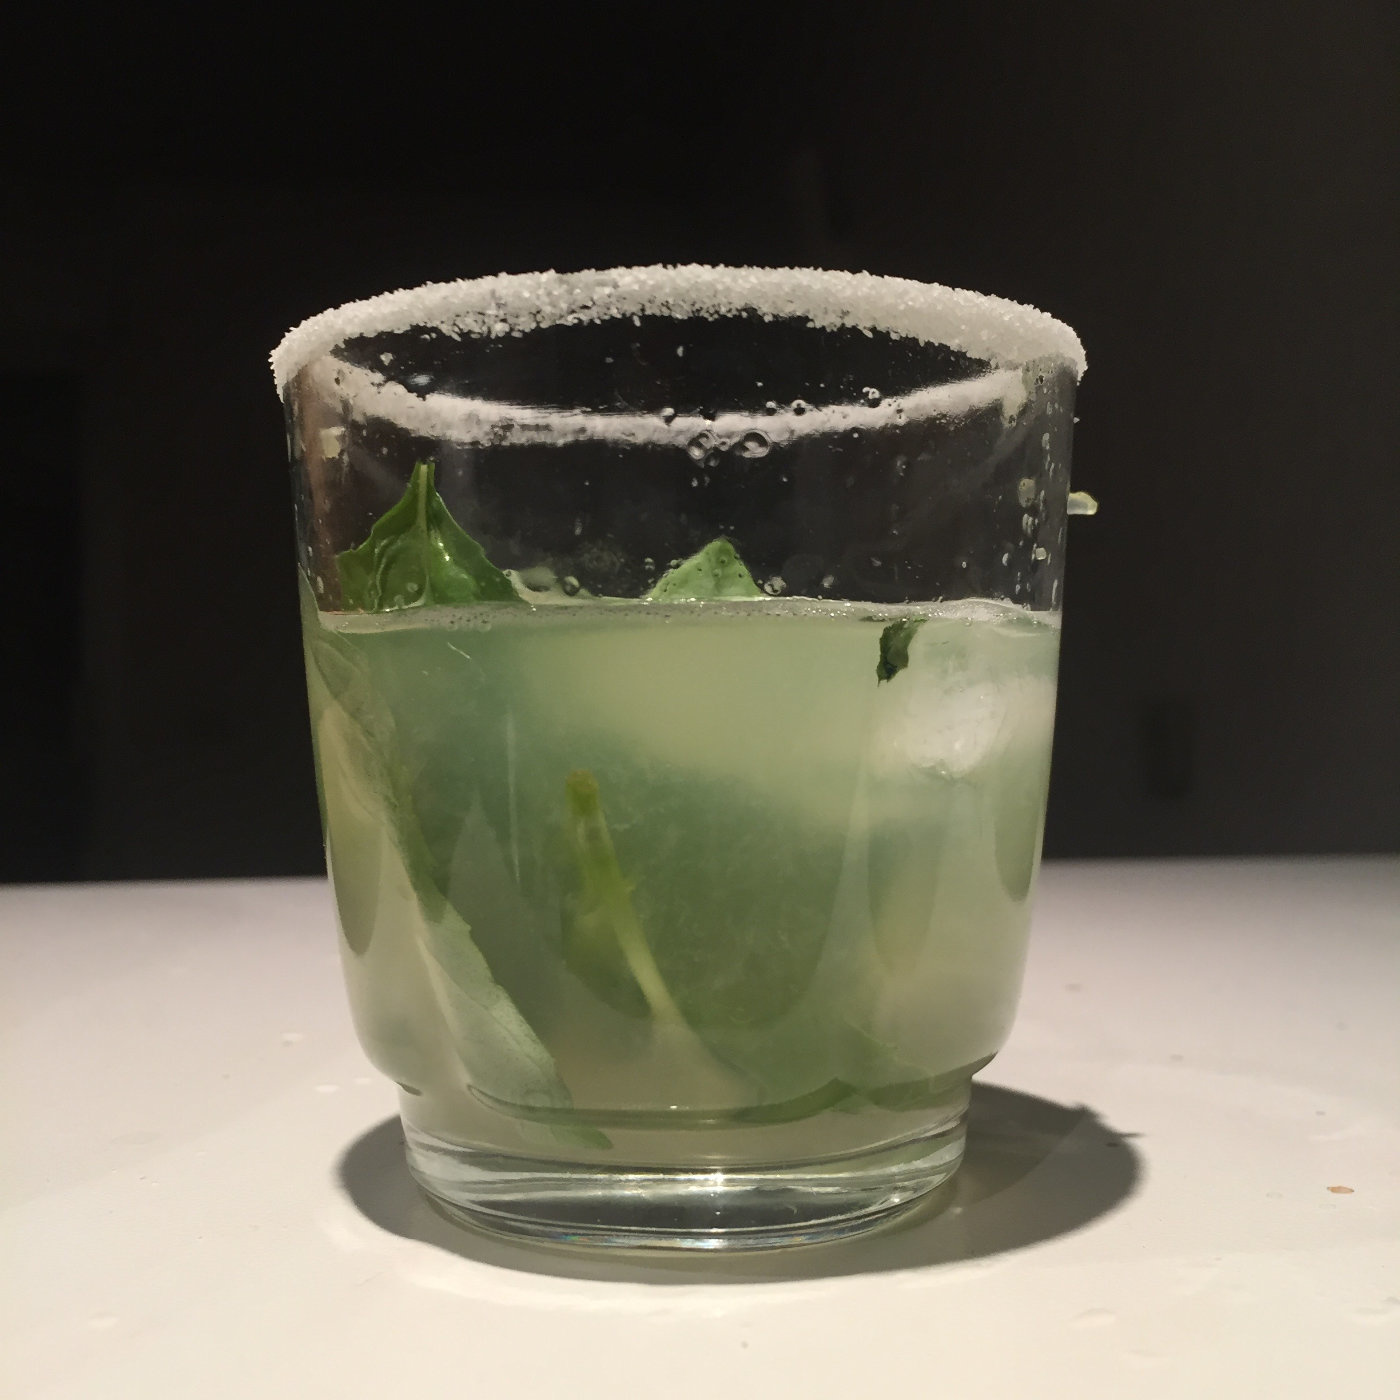 Its all about that salt rim. Throw in a little basil and let that feeling sink in.